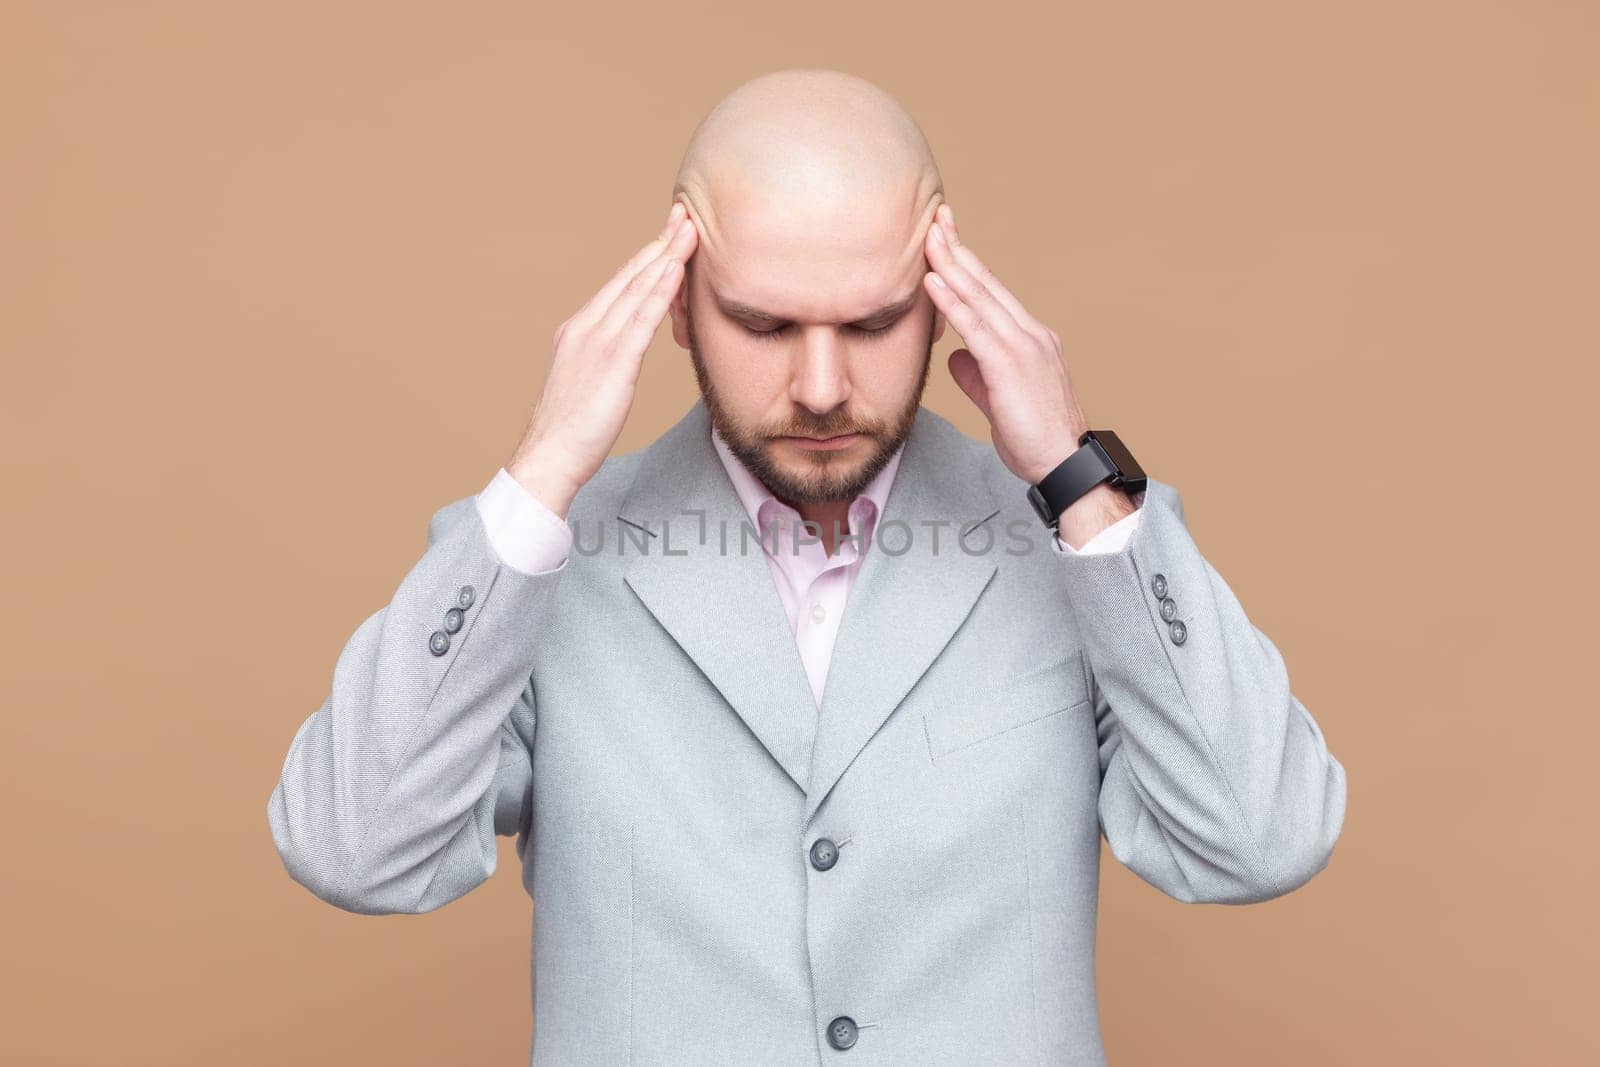 Portrait of sick ill unhealthy bald bearded man standing with hands on head, keeps eyes closed, suffering terrible headache, wearing gray jacket. Indoor studio shot isolated on brown background.